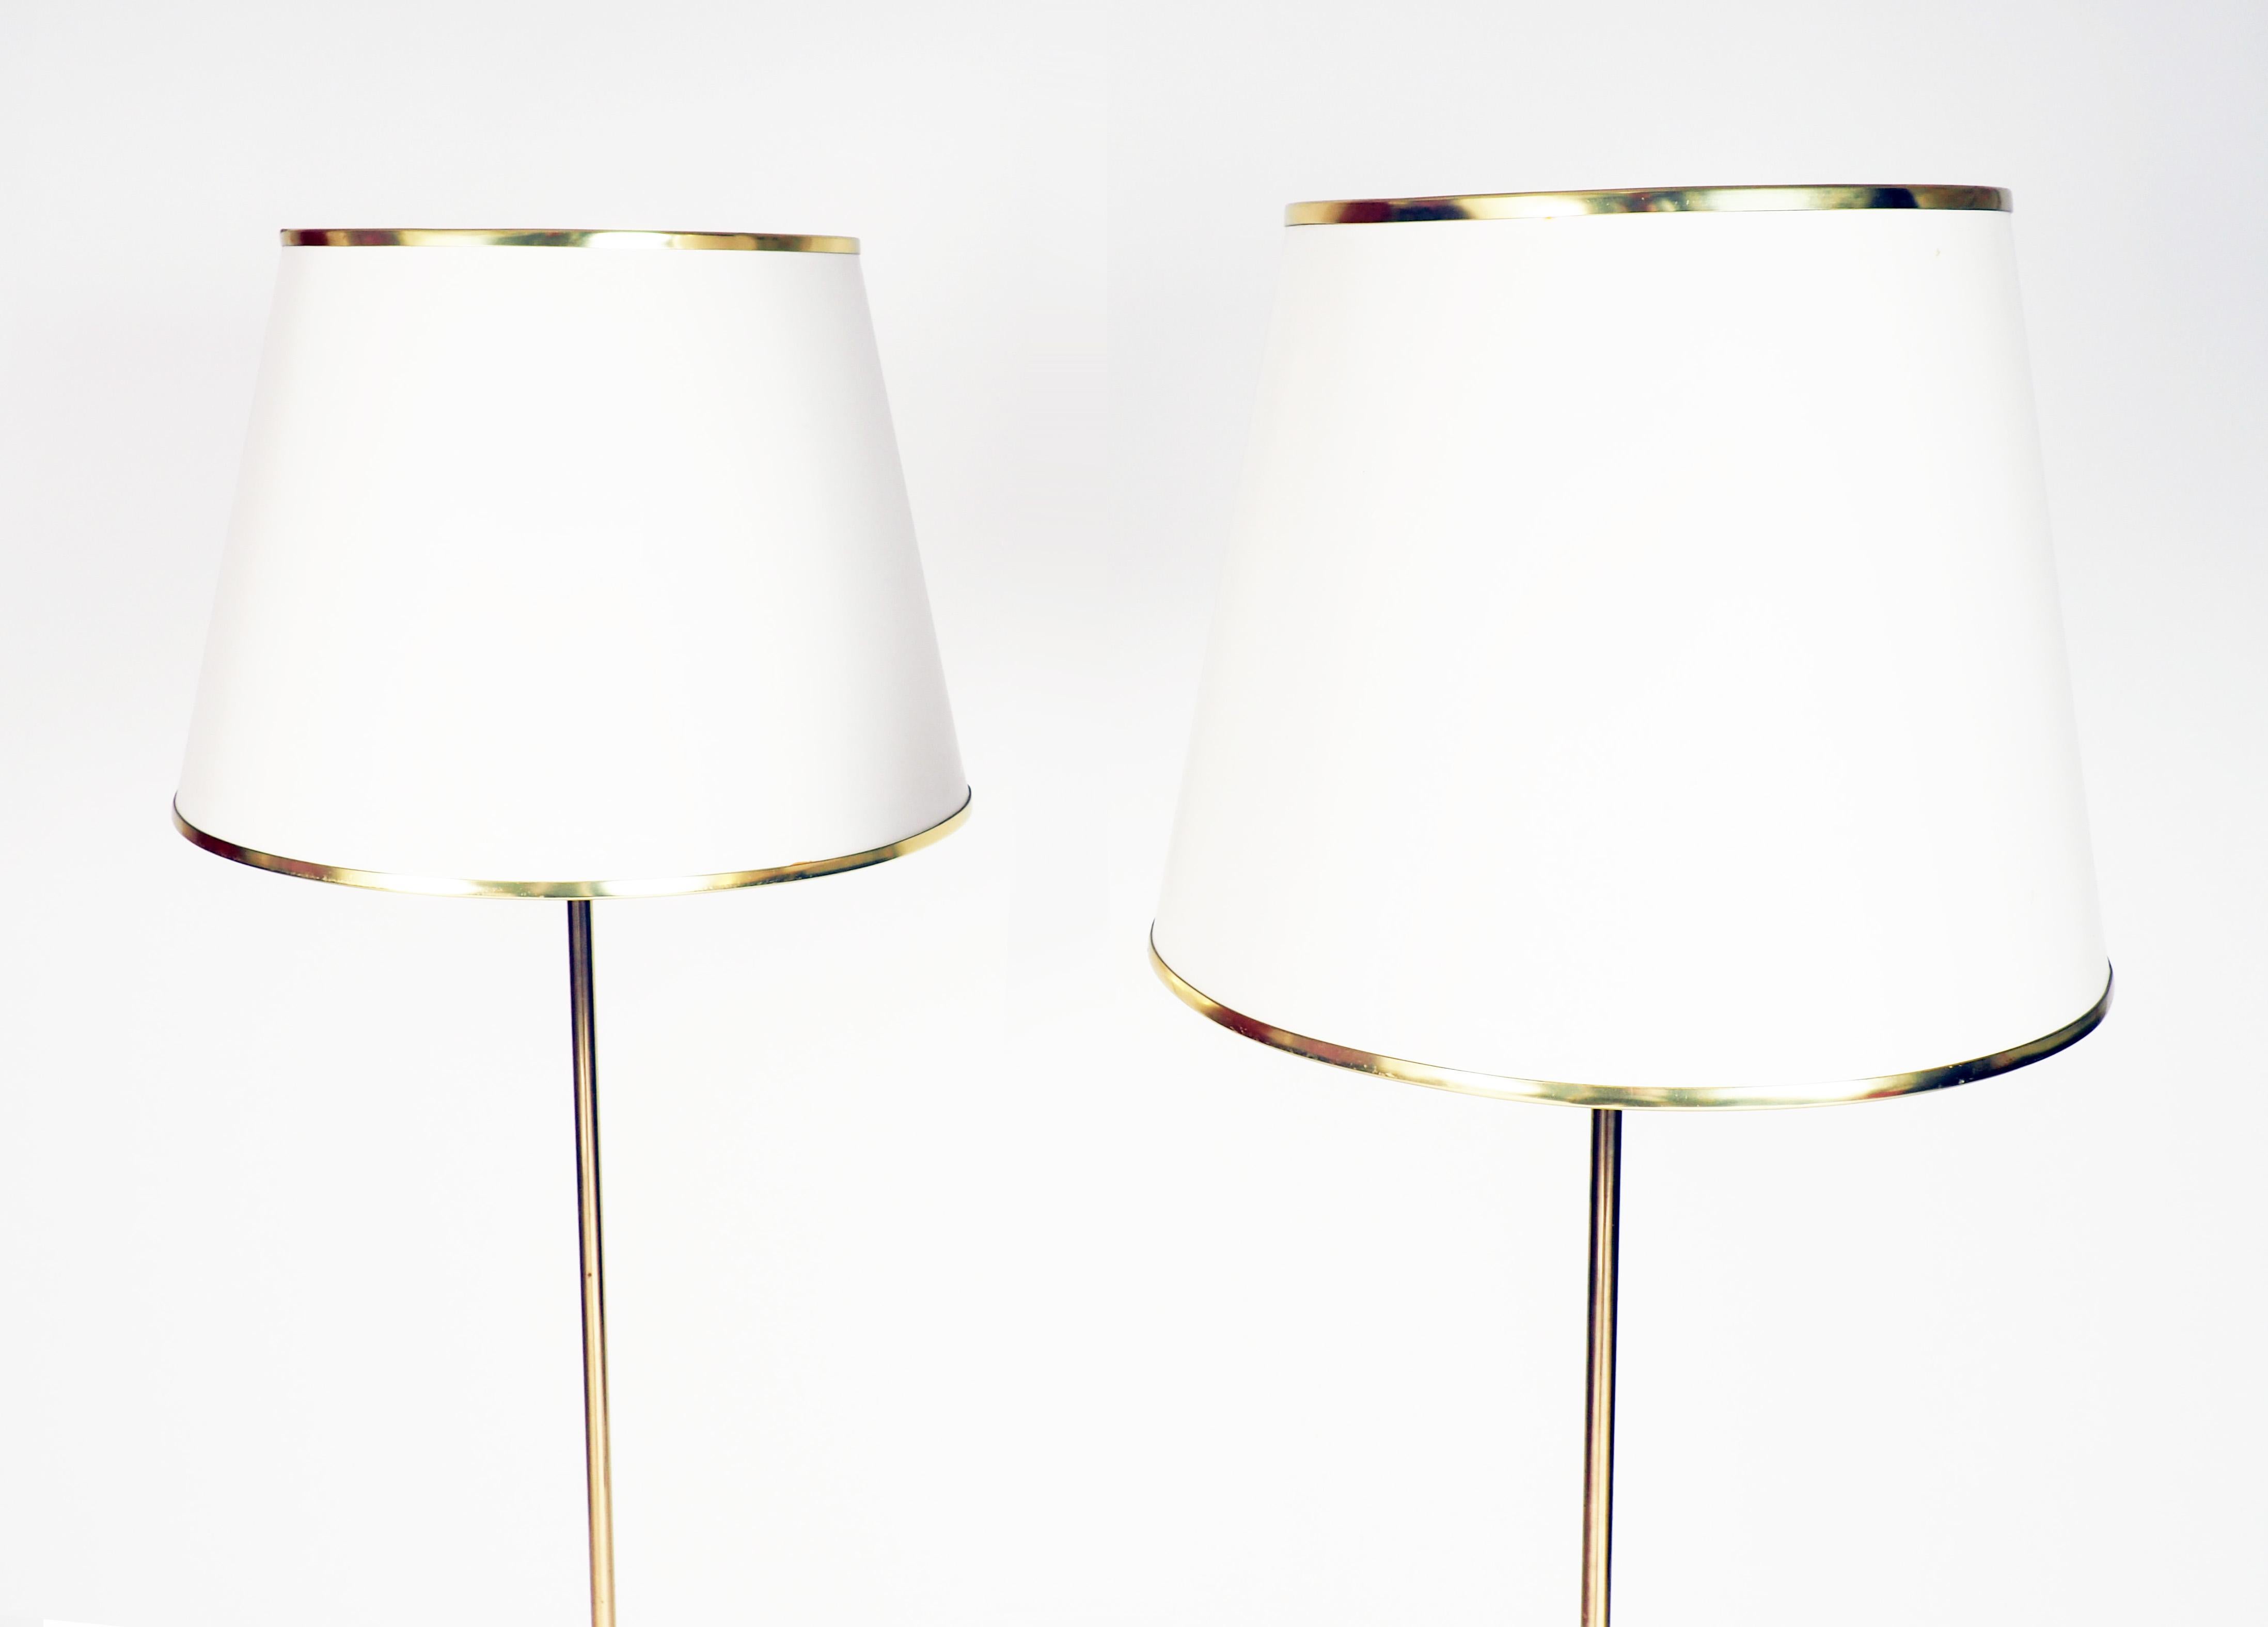 Scandinavian Modern A Pair of Floor Lamps in Brass with original shades. Made by Bergboms, Sweden